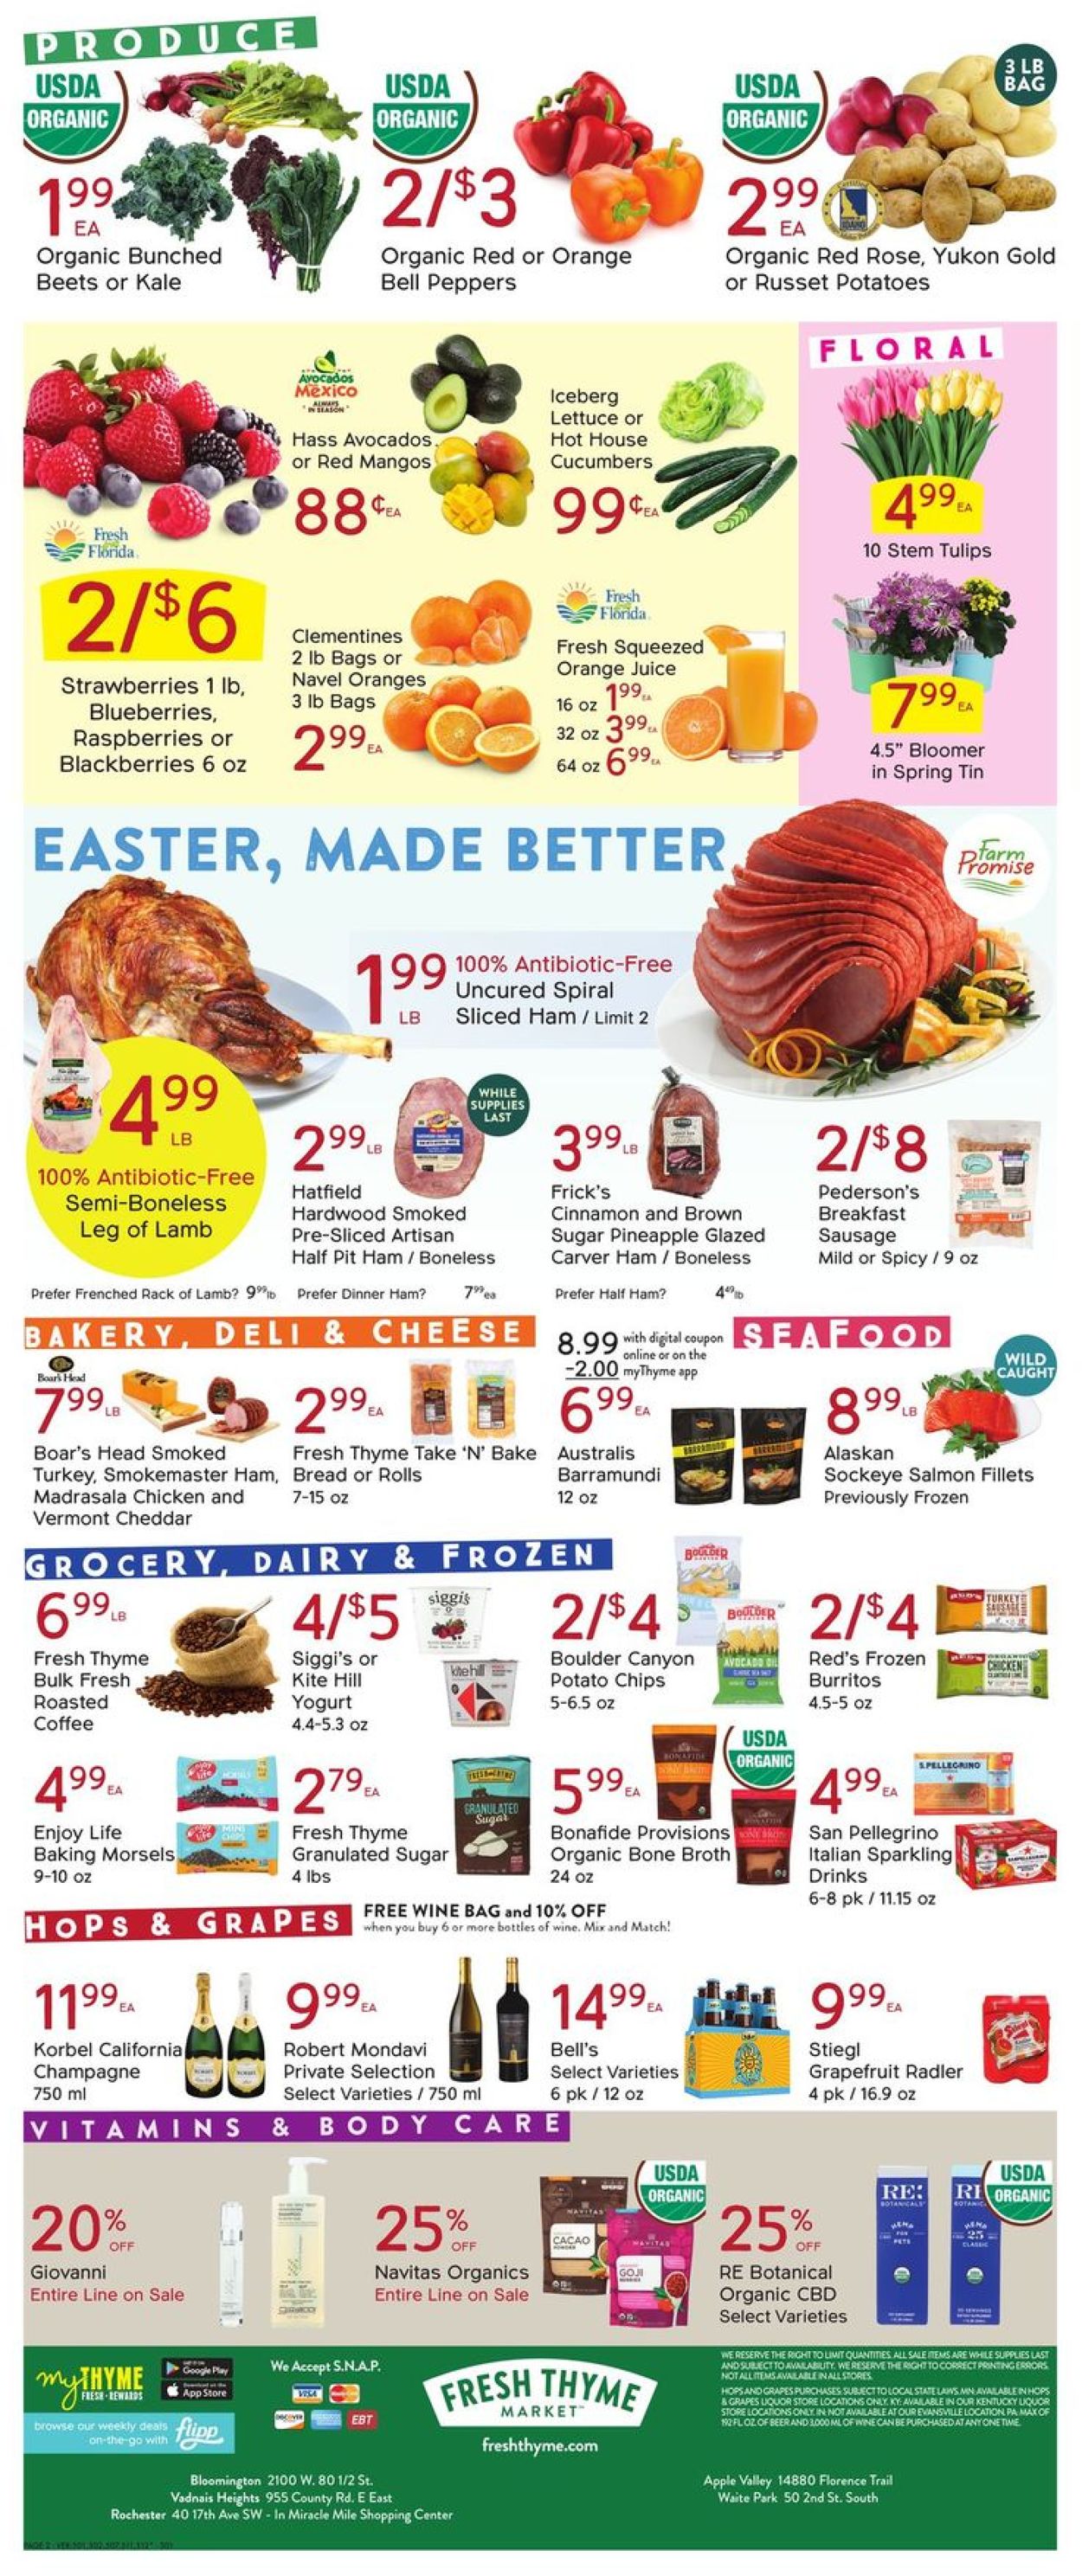 Fresh Thyme - Easter 2021 Current weekly ad 03/24 - 03/30/2021 [2 ...